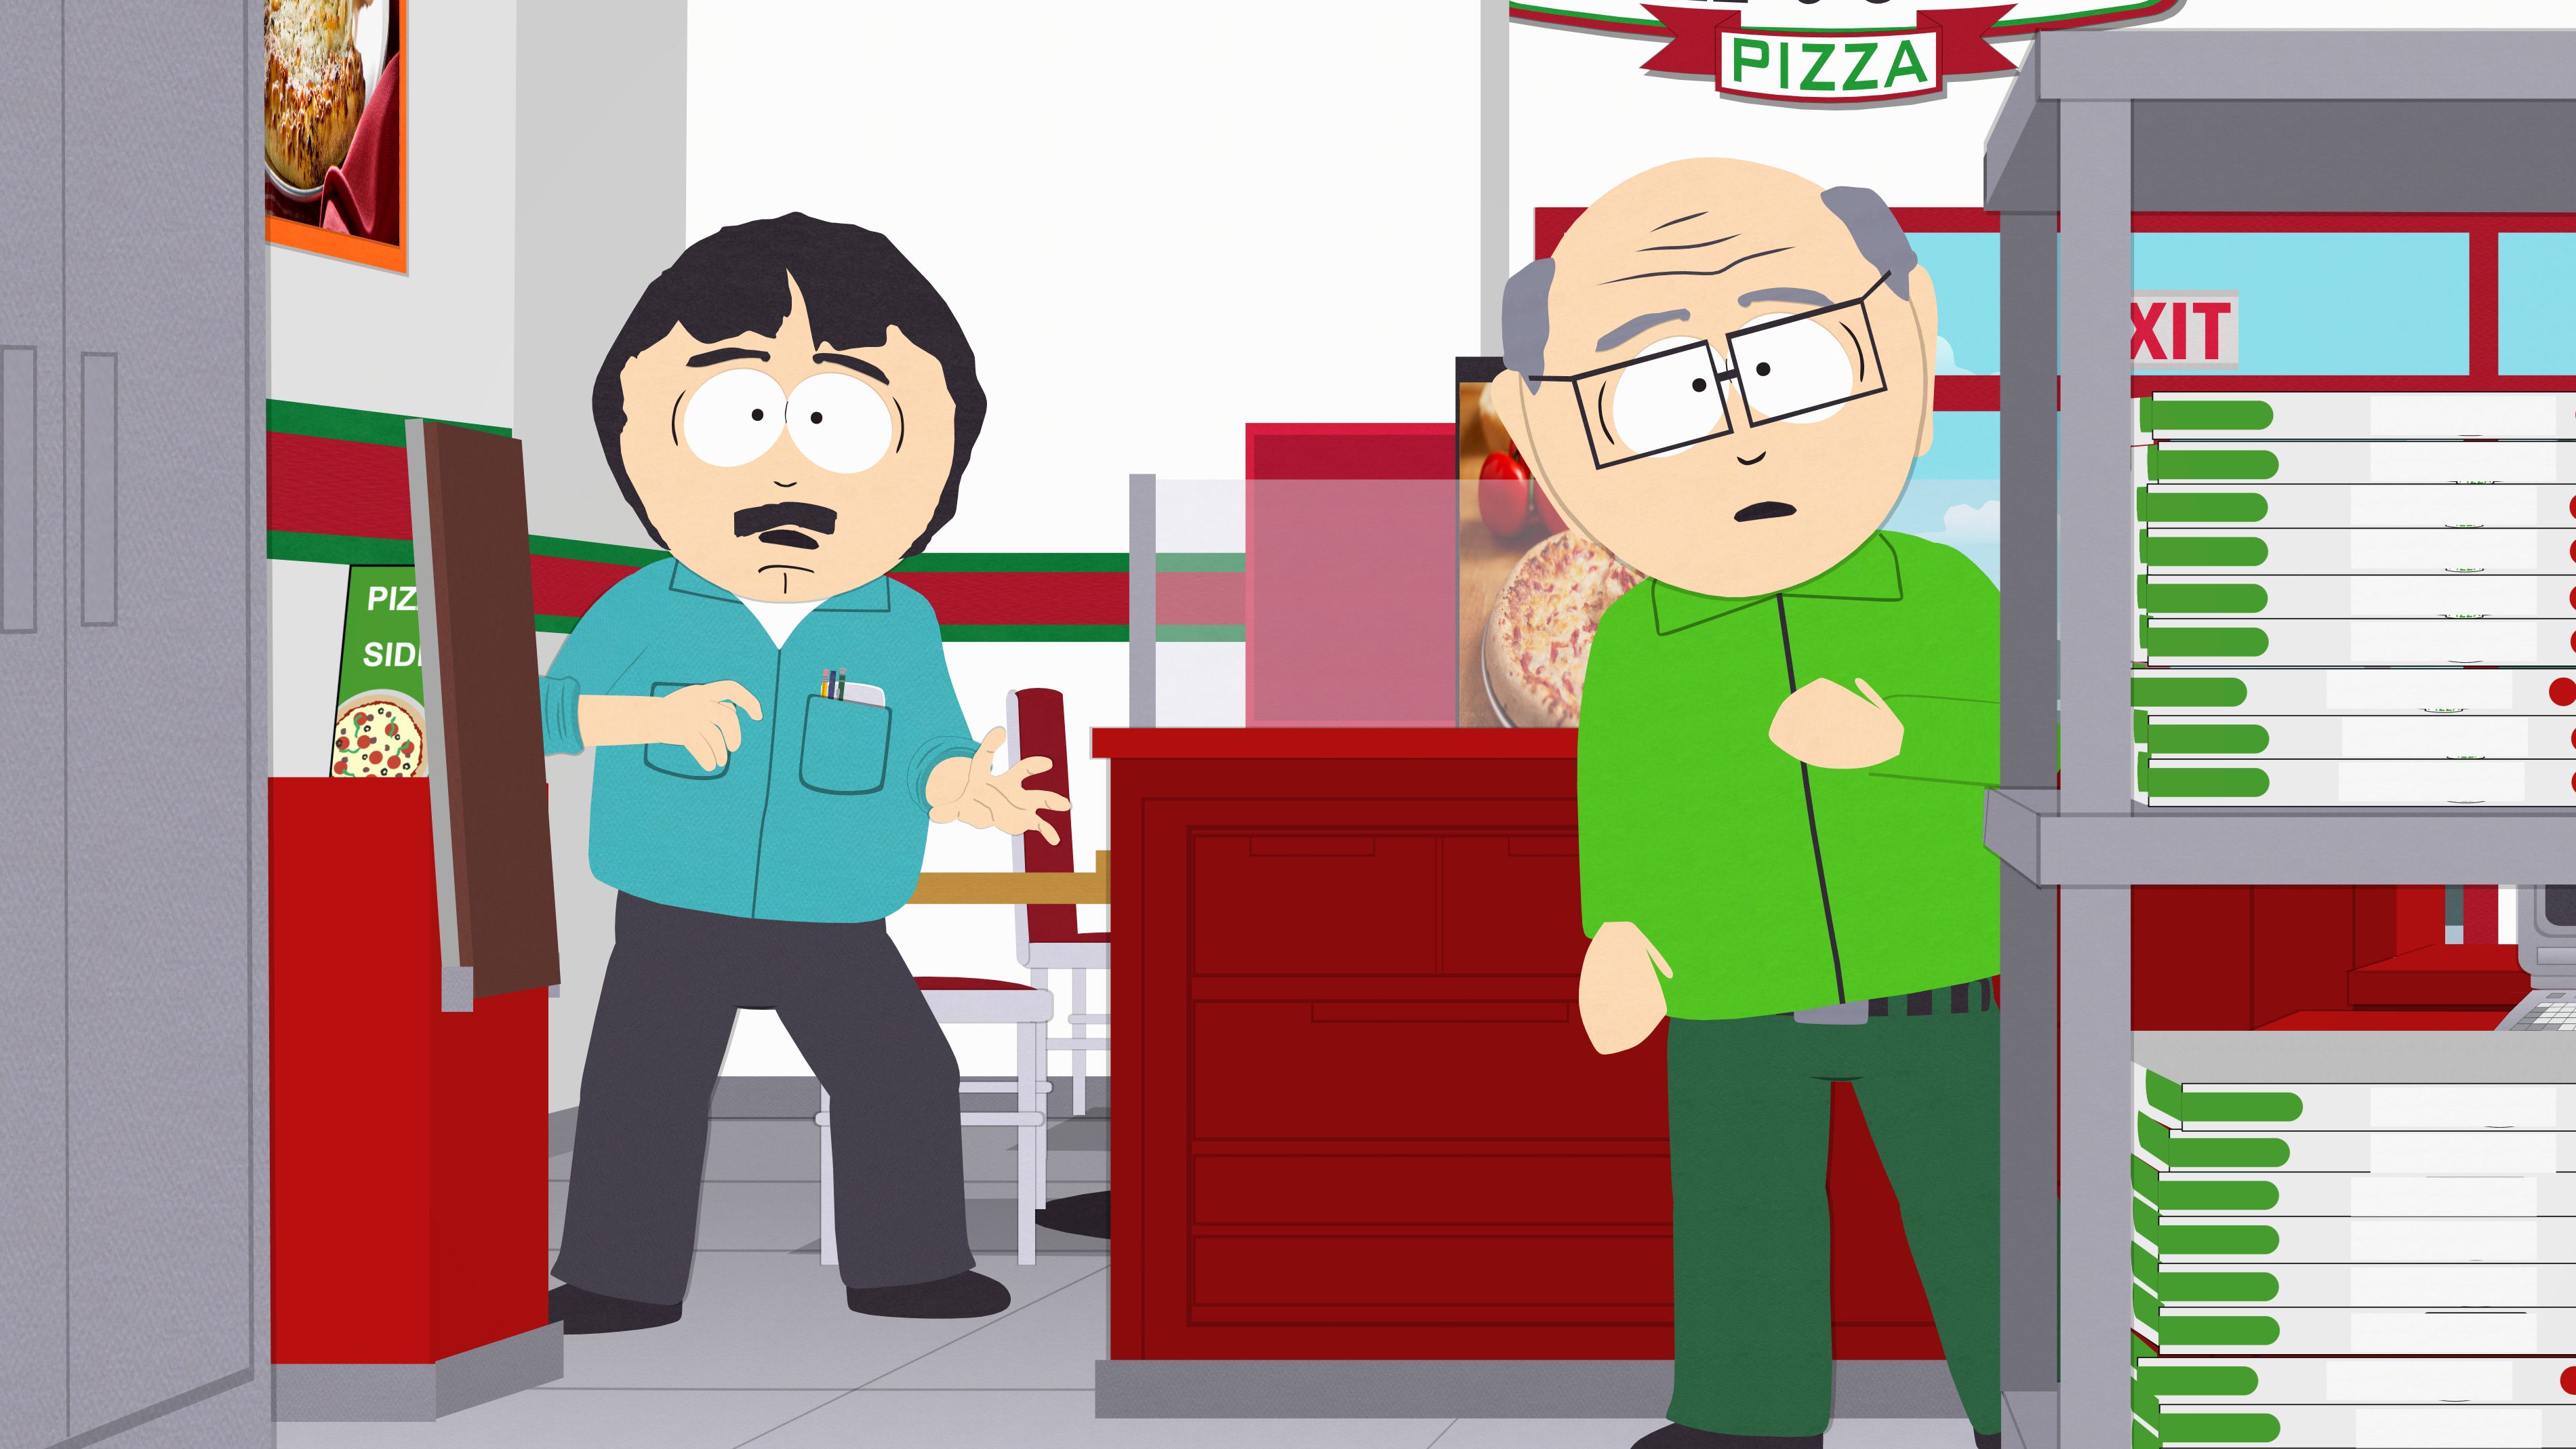 Mr. Garrison and Randy Marsh in a pizza parlor